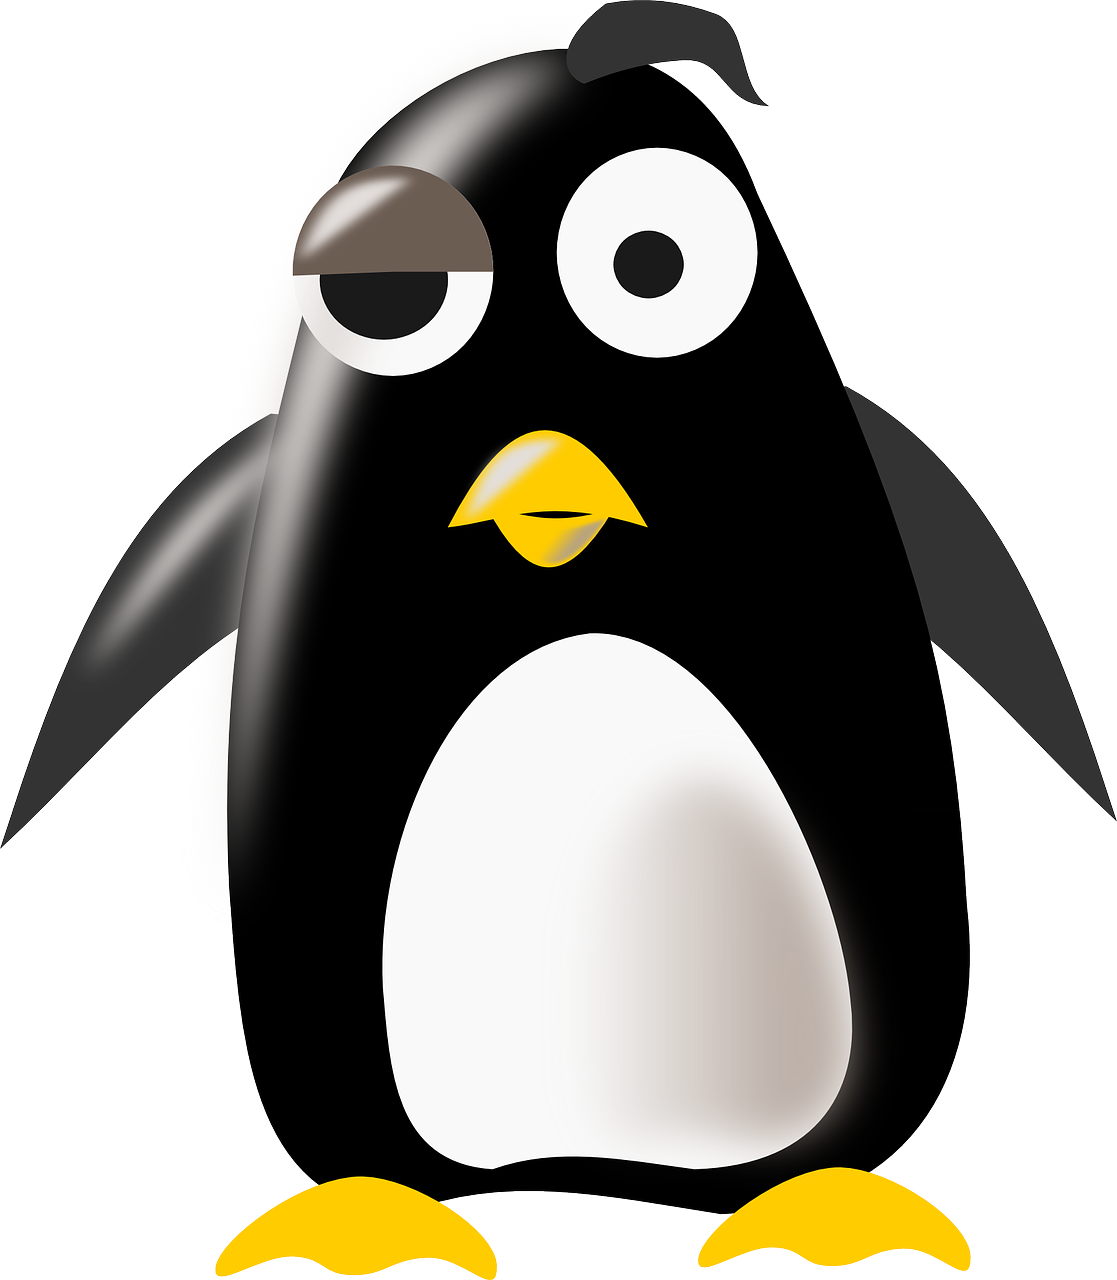 a close up of a penguin on a white background, an illustration of, pixabay, computer art, black eye patch over left eye, cell-shaded, looking confused, bag